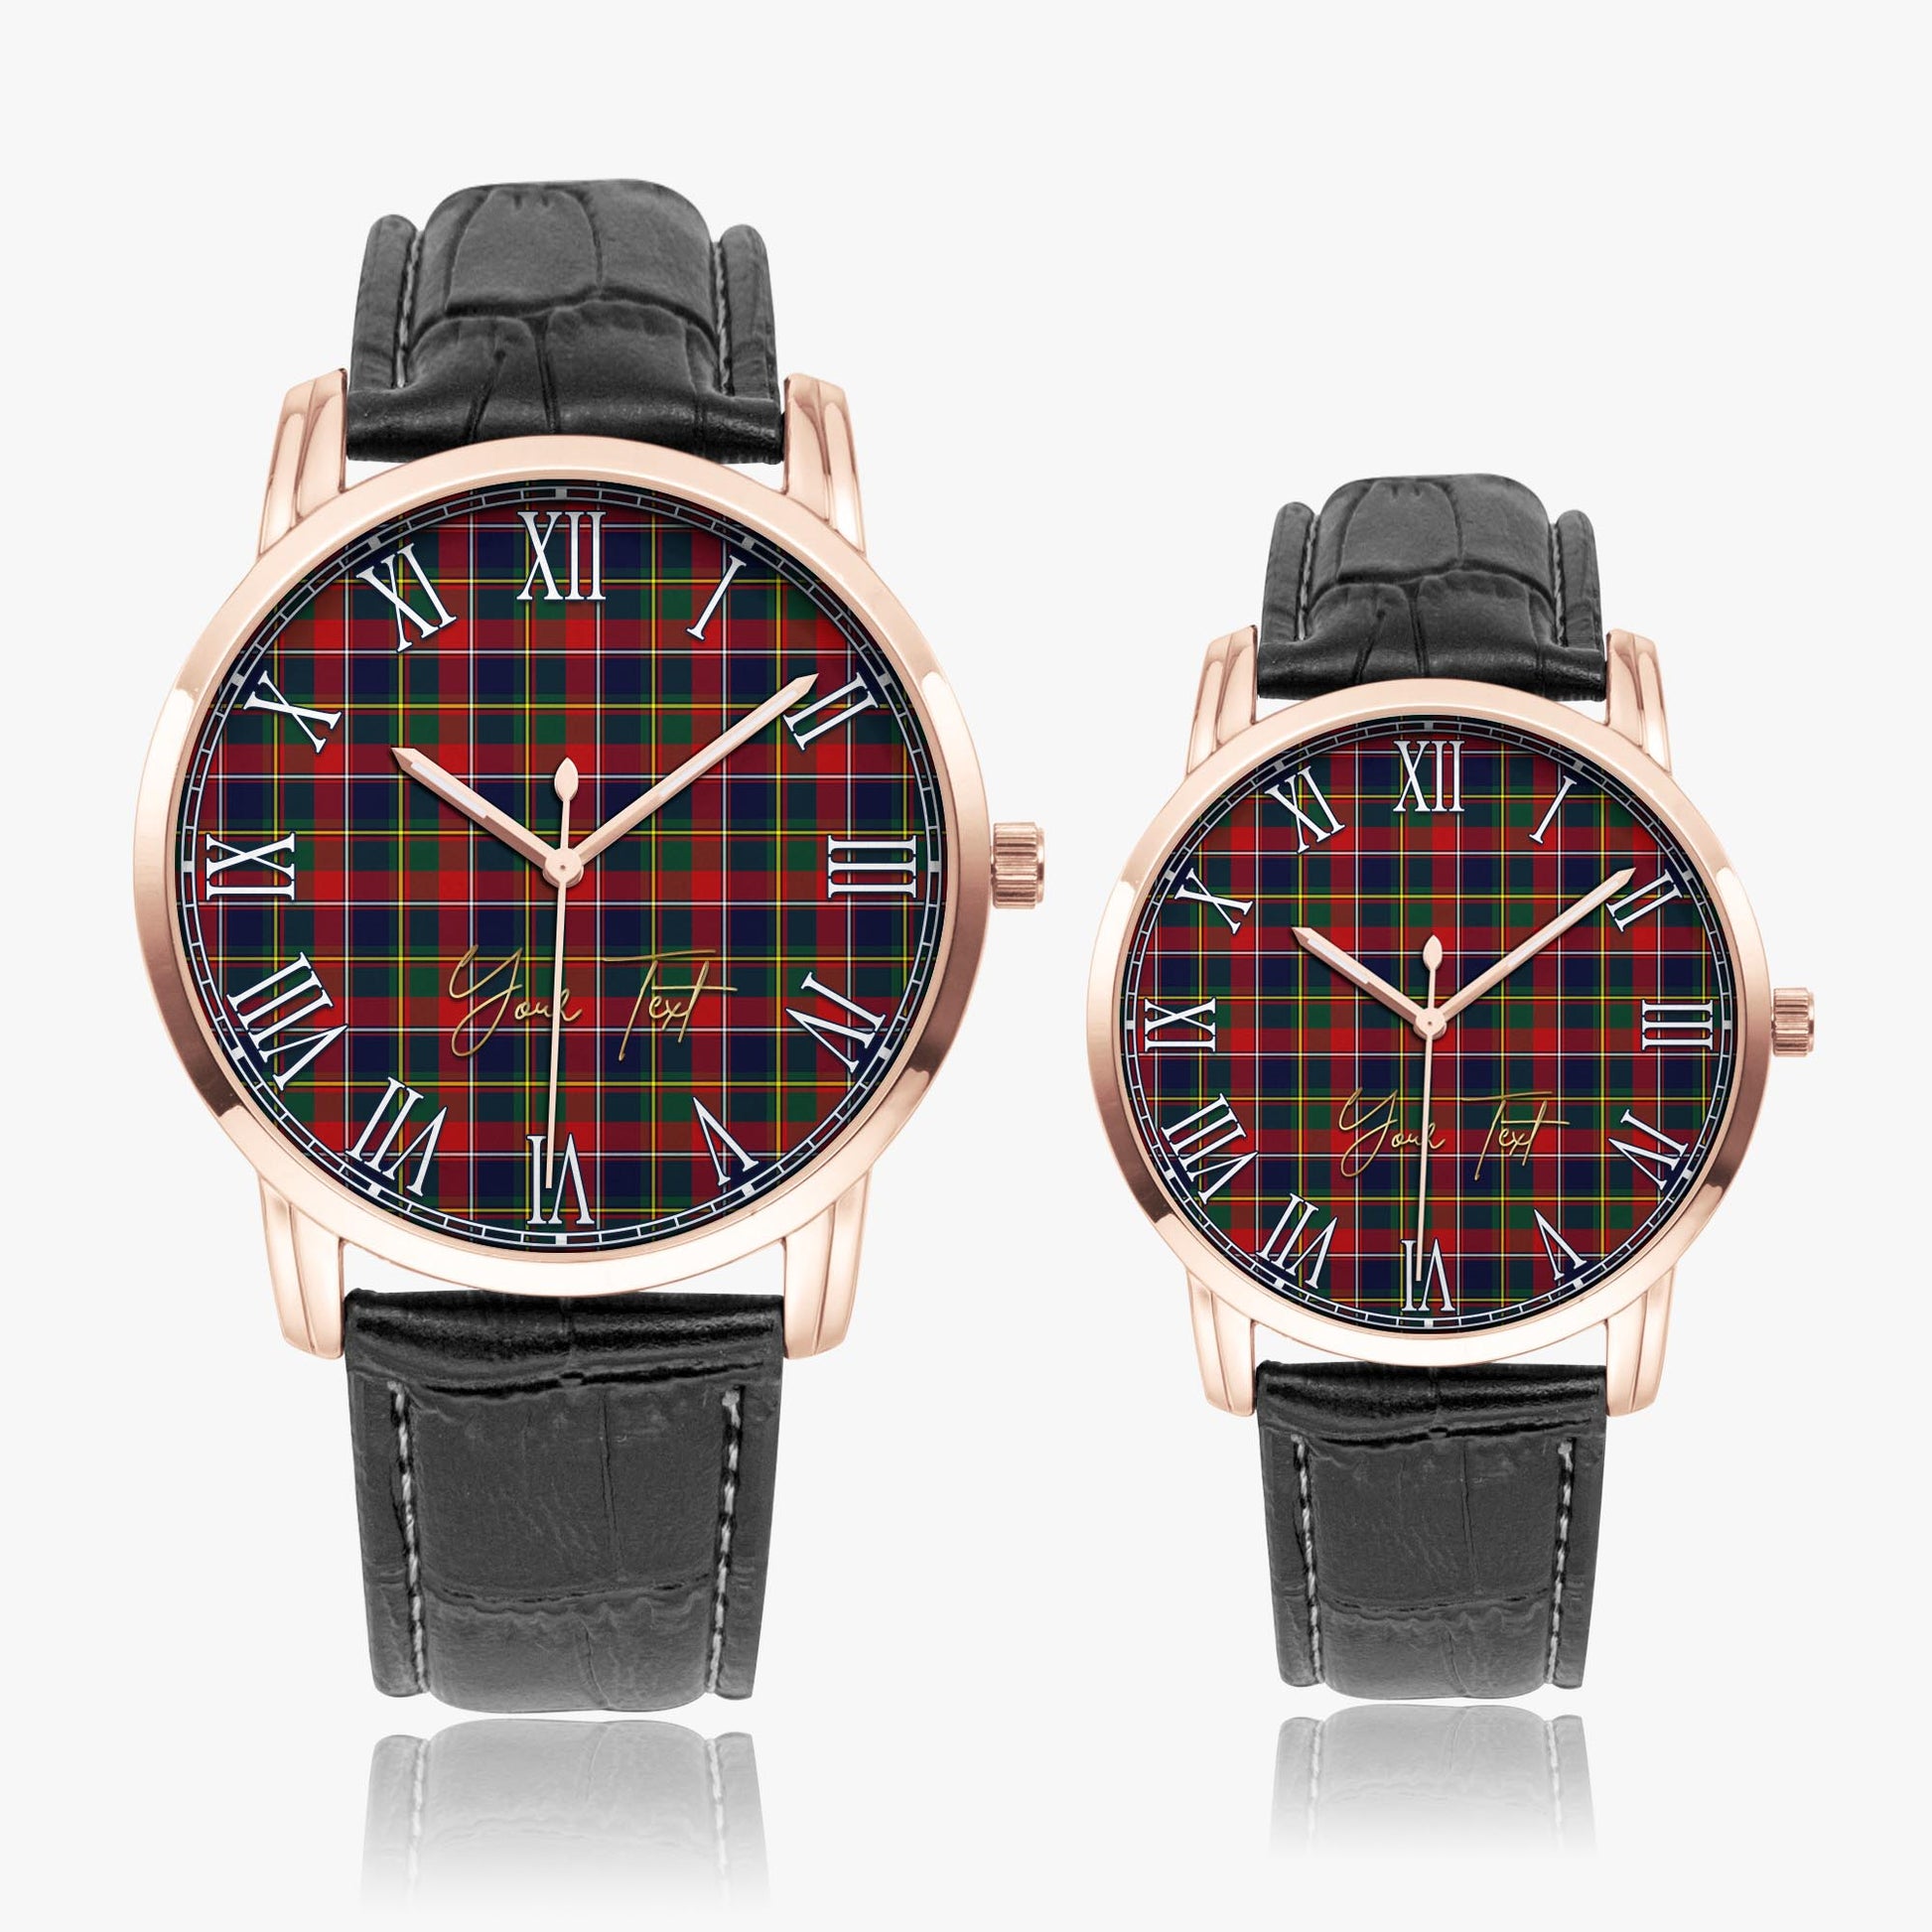 Quebec Province Canada Tartan Personalized Your Text Leather Trap Quartz Watch Wide Type Rose Gold Case With Black Leather Strap - Tartanvibesclothing